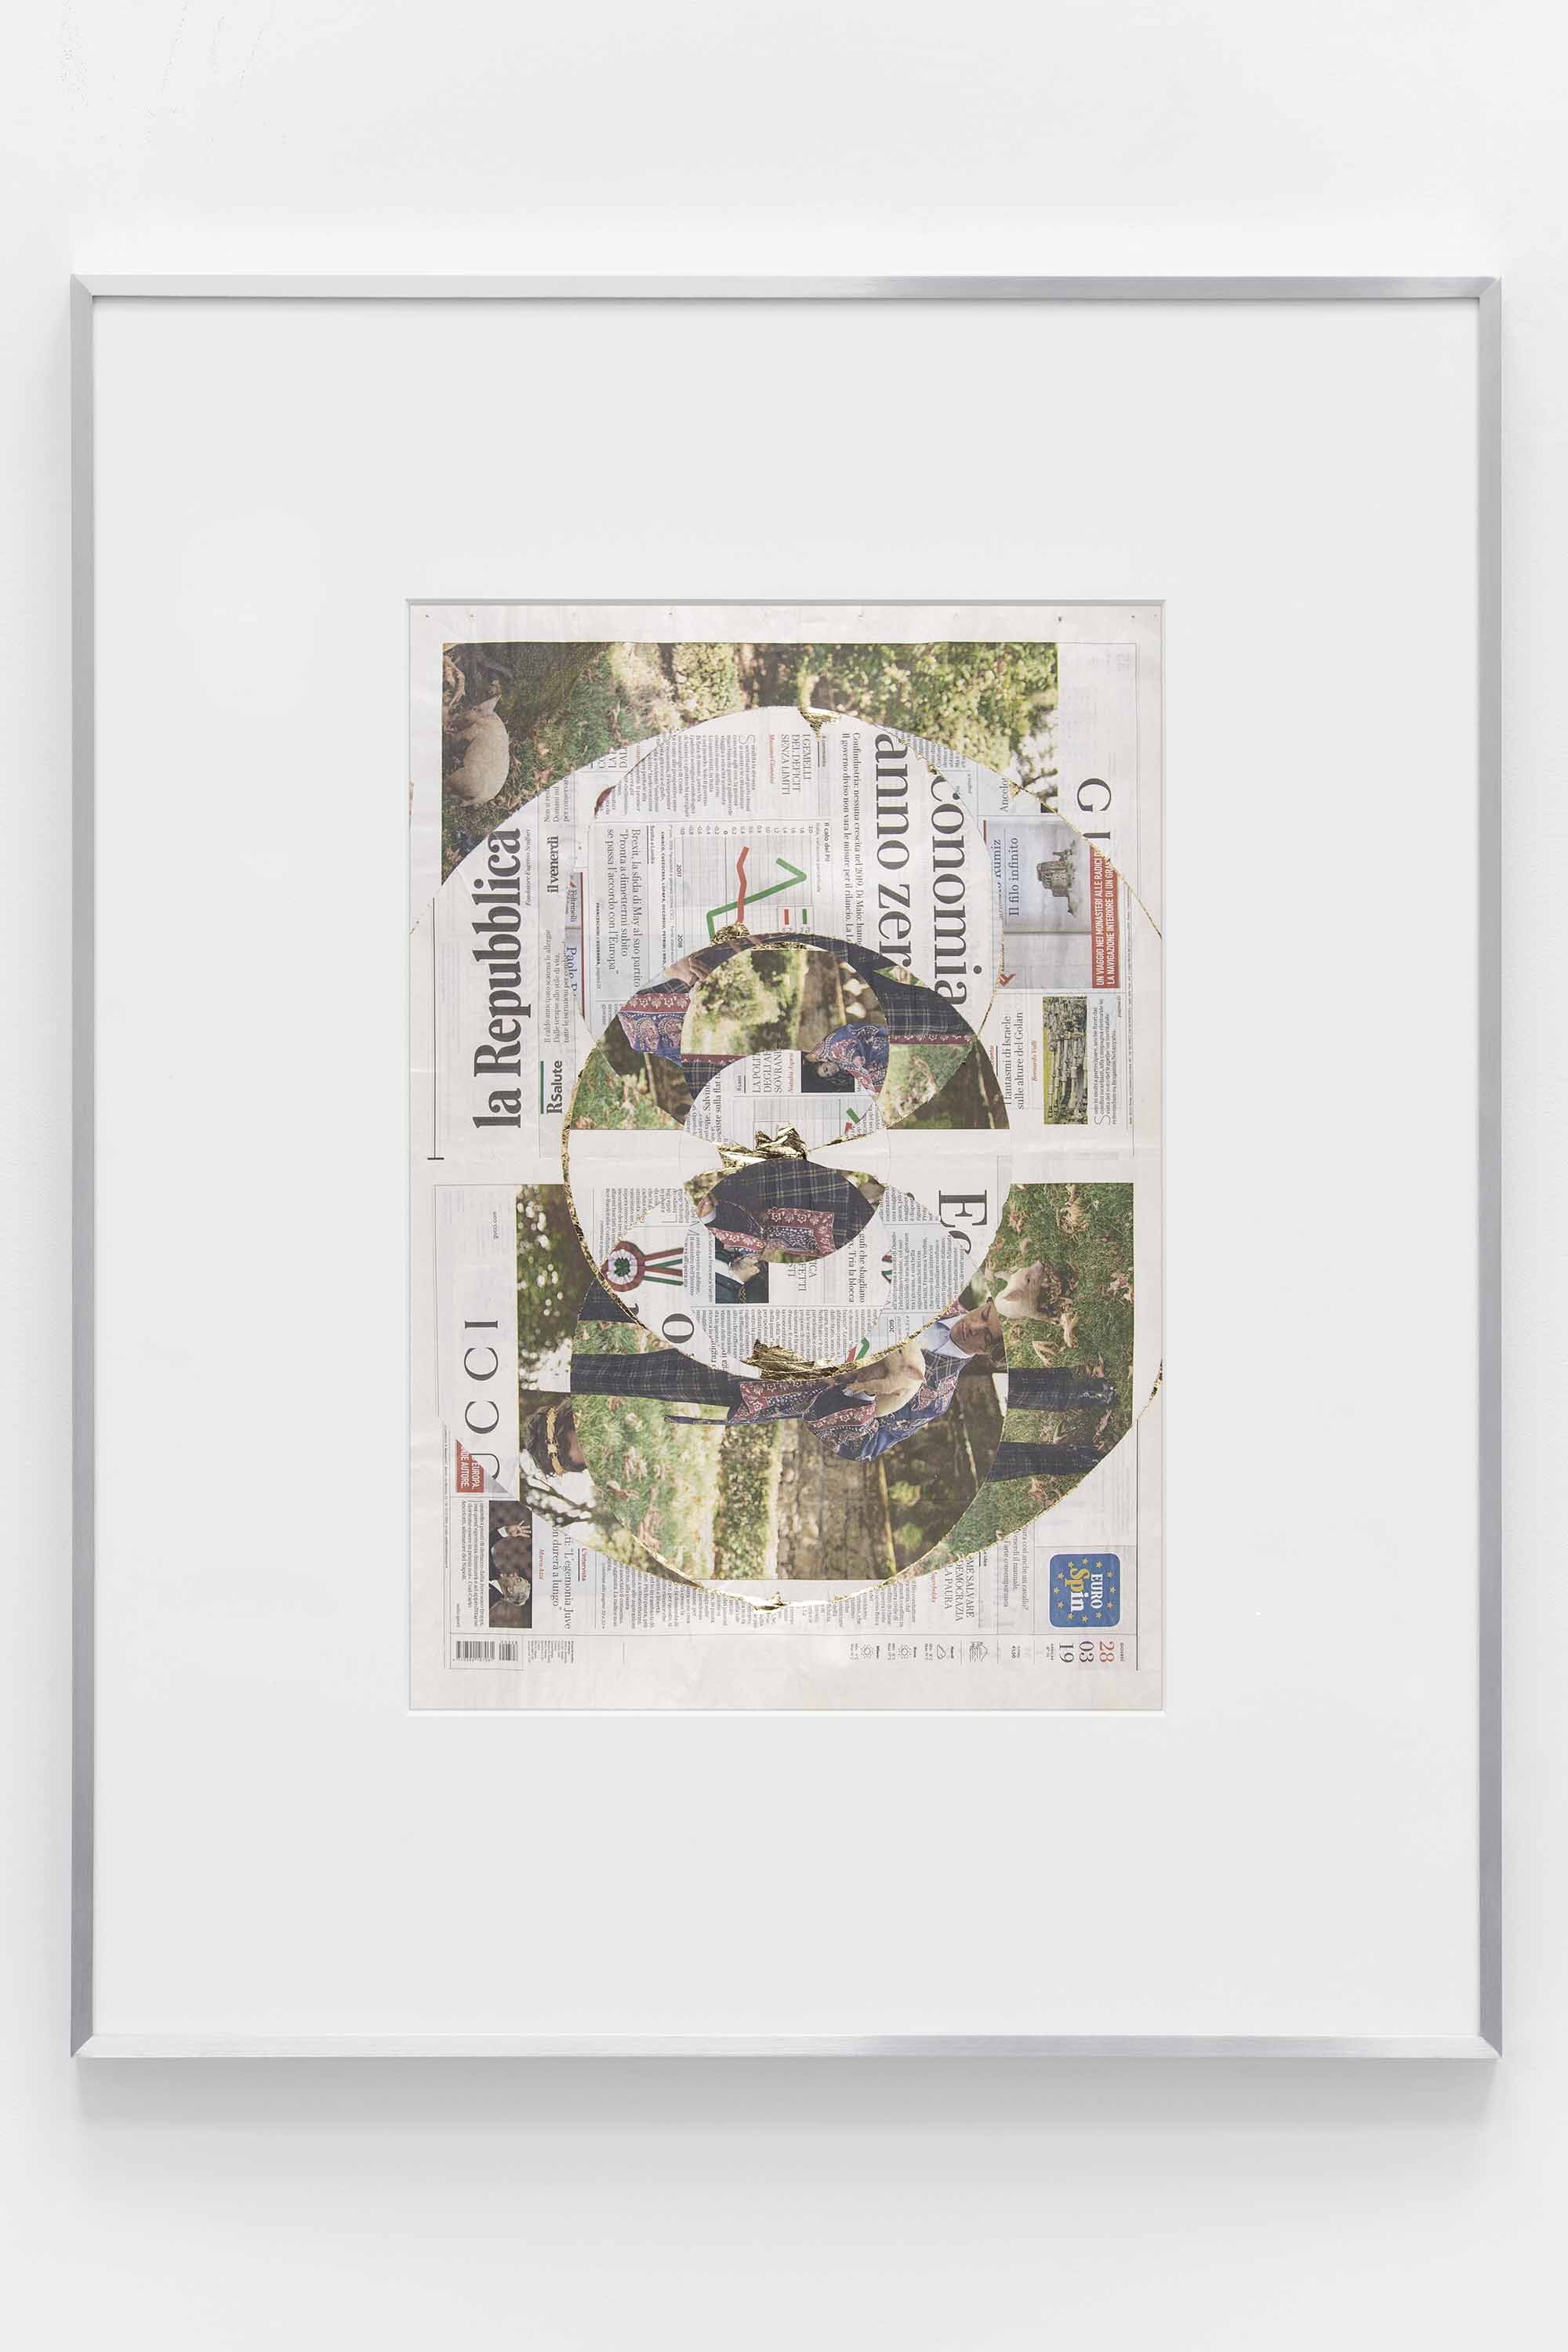   Blind Collage (Seven 180º Rotations, La Repubblica: Naples, Italy, Thursday, March 28, 2019)   2021  Newspaper, tape, and 22 karat gold leaf  39 1/8 x 31 1/4 inches   Blind Collages, 2017–   Exhibition:   Foreign Correspondence, 2021  